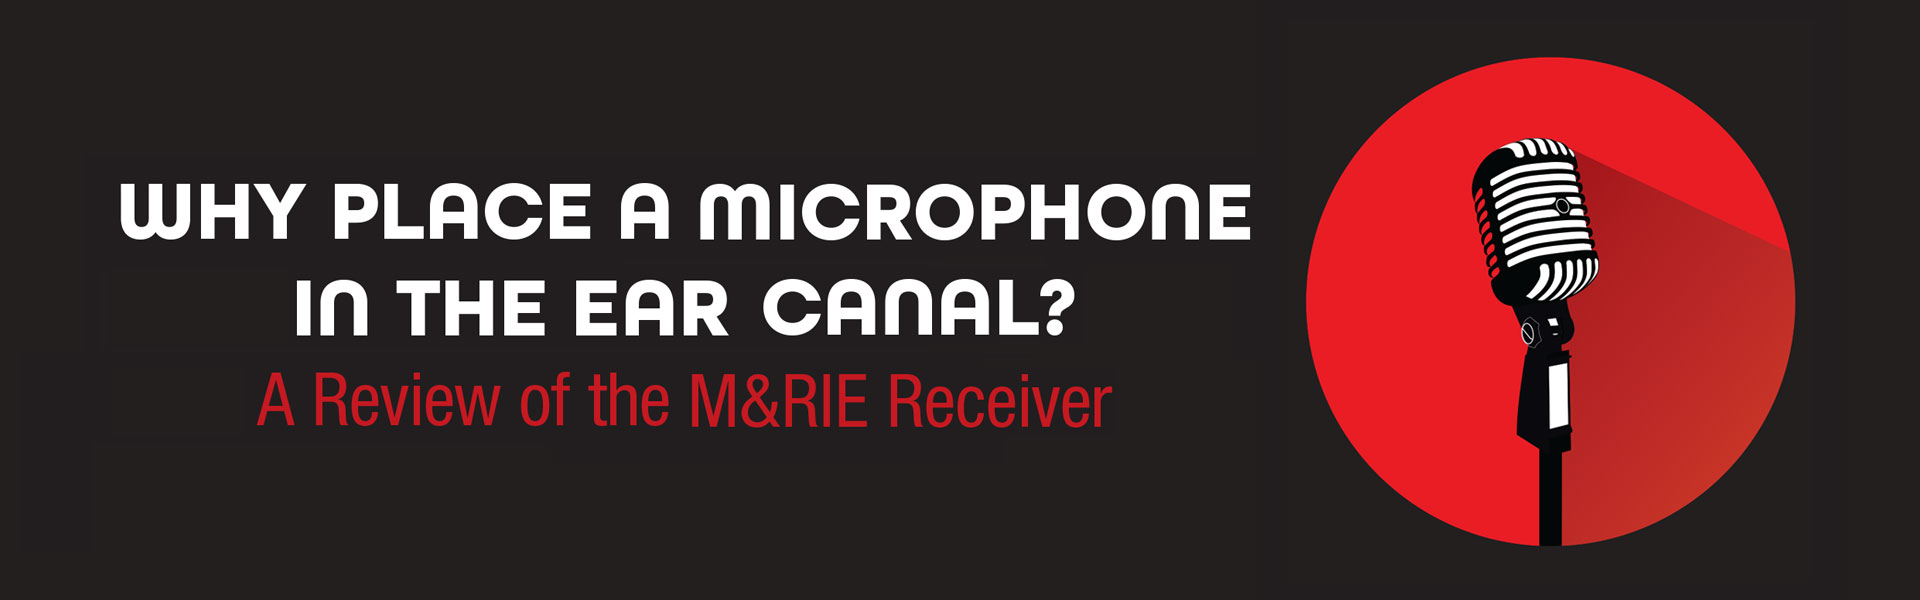 Why Place a Microphone in the Ear Canal?